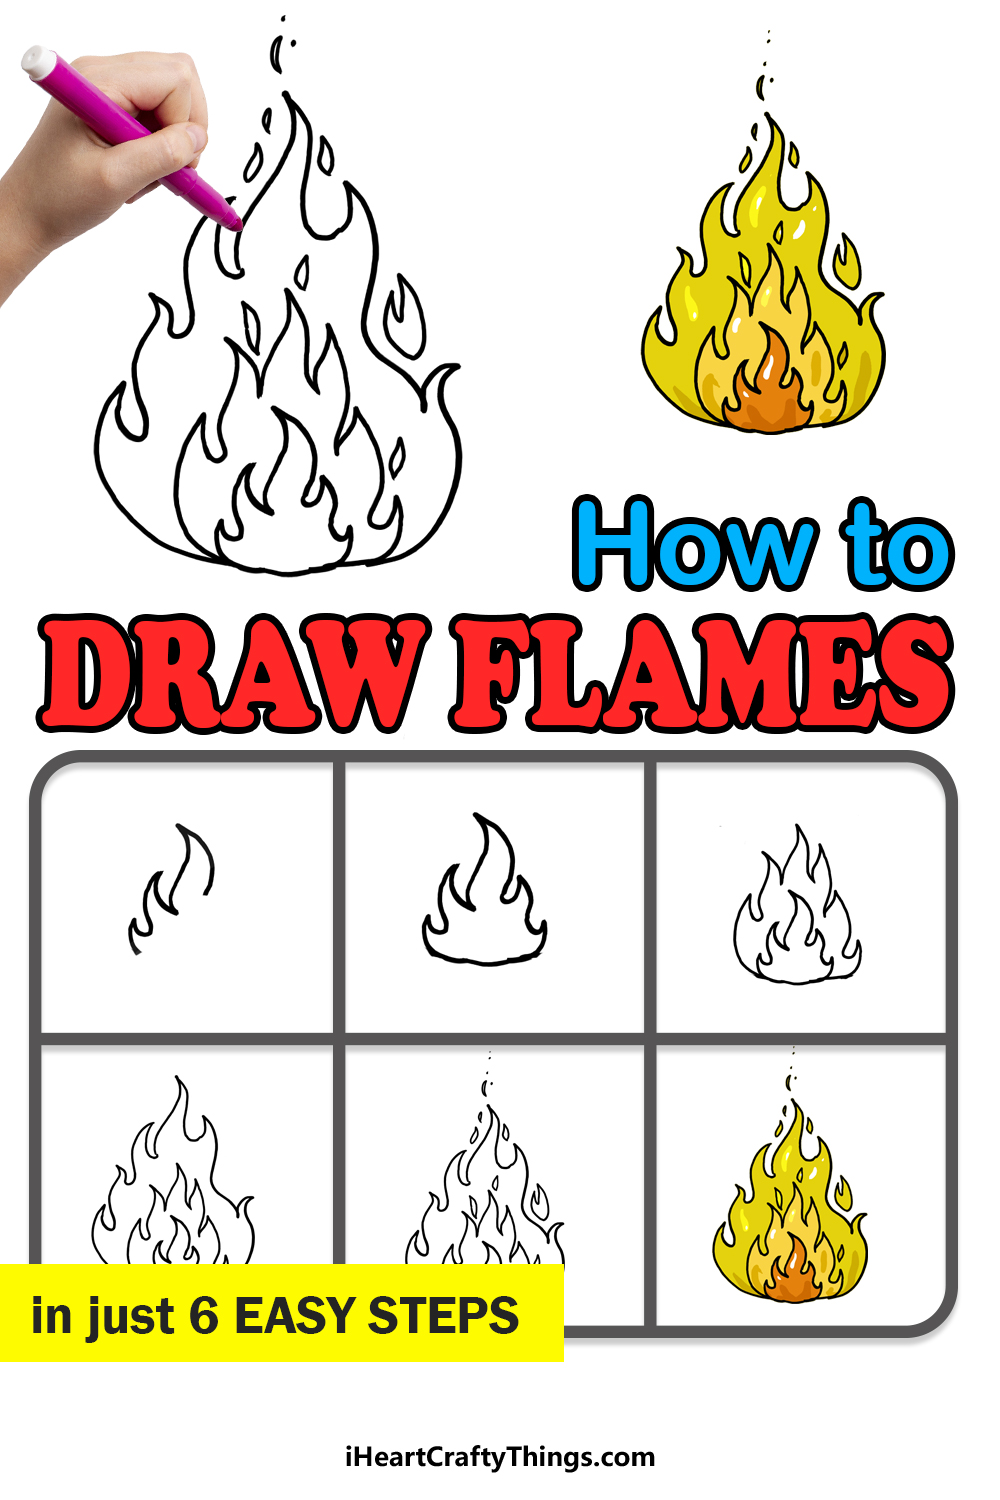 How to Draw Flames step by step guide